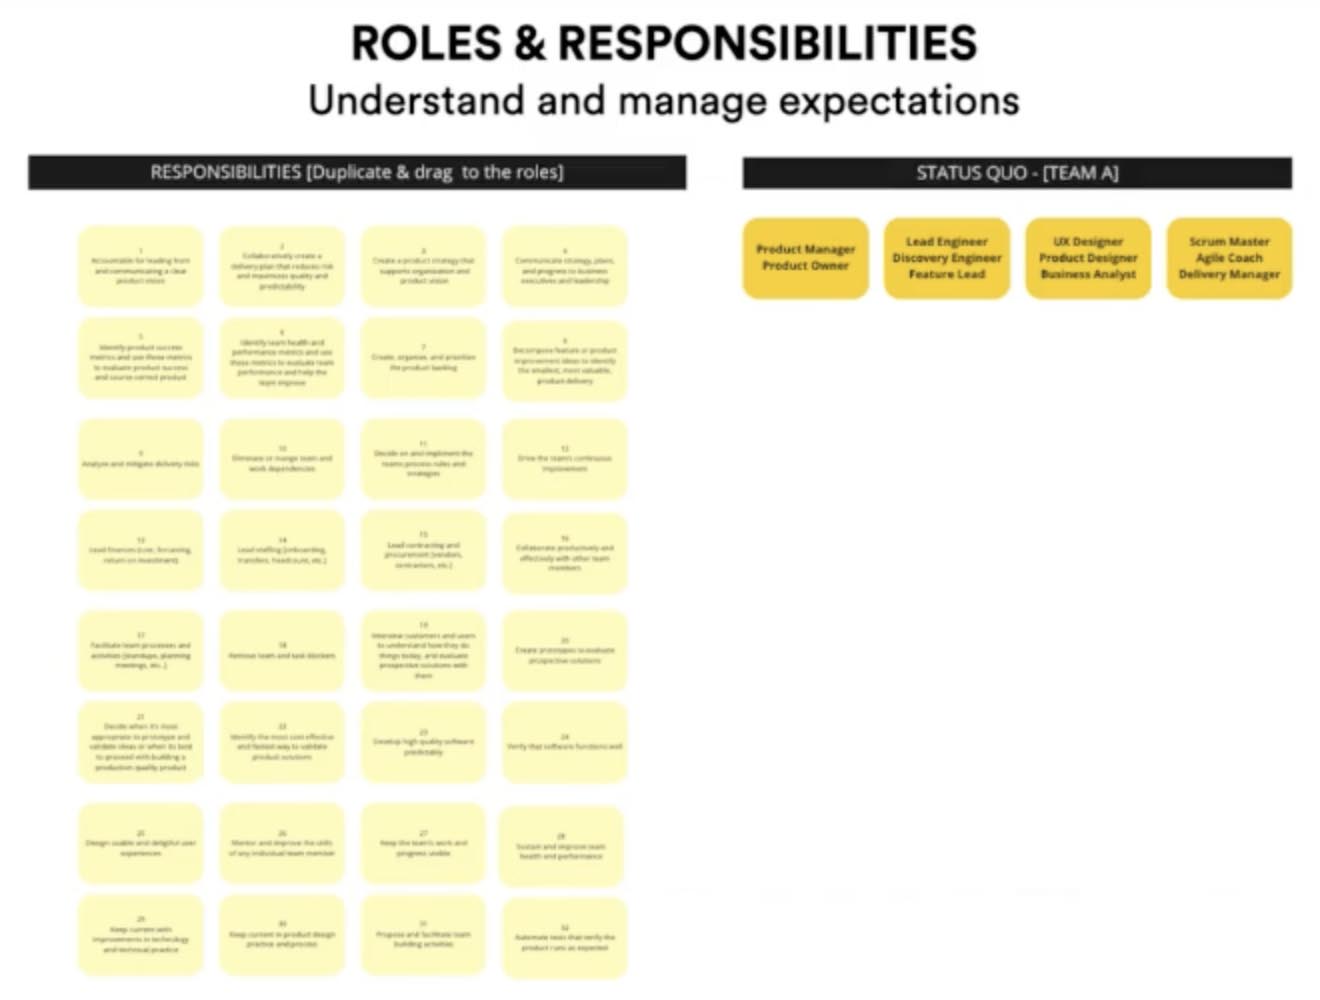 Thomas Gläser's Roles and Responsibilities exercise